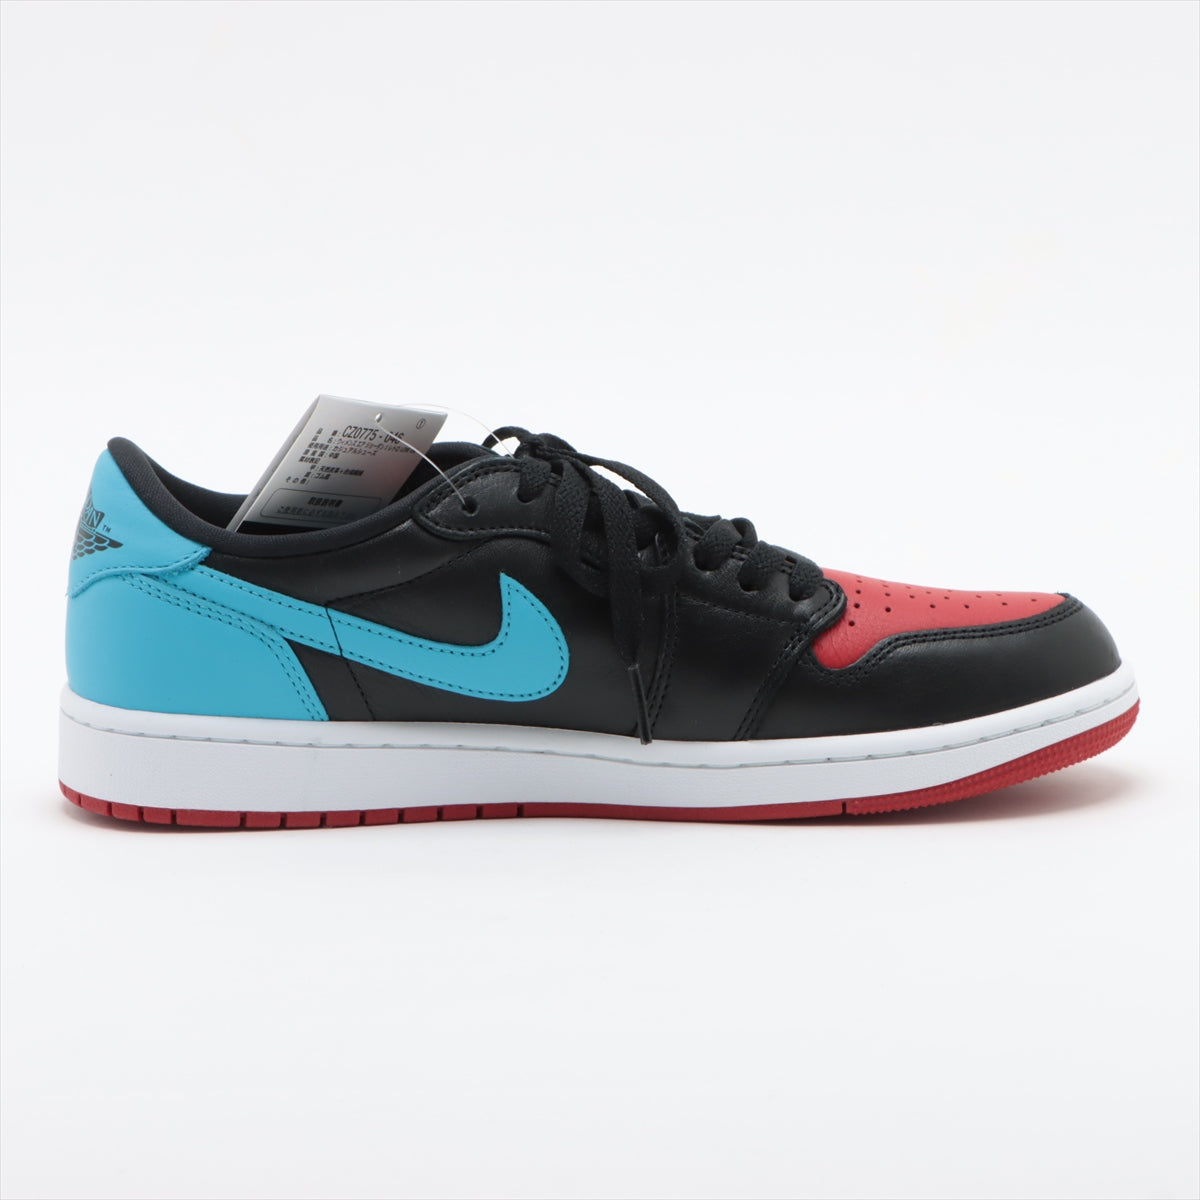 Nike Leather Sneakers 28㎝ Ladies' Multicolor CZ0775-046 AIR JORDAN 1 RETRO LOW OG Box Replacement Laces Included